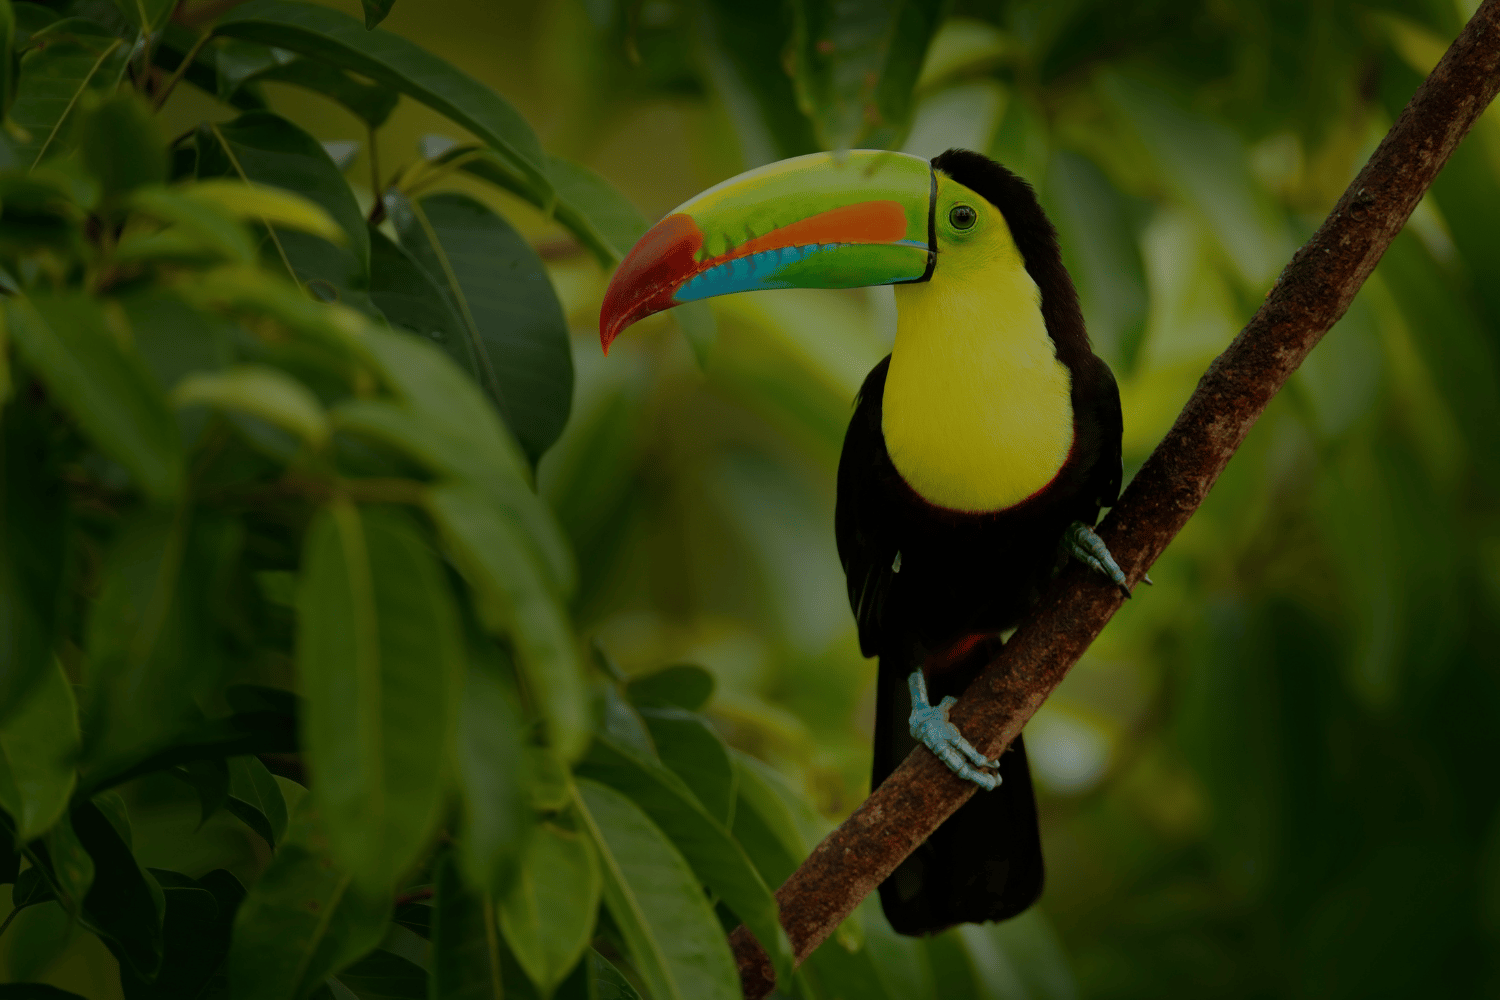 A toucan sits on a branch in the rainforests of Costa Rica